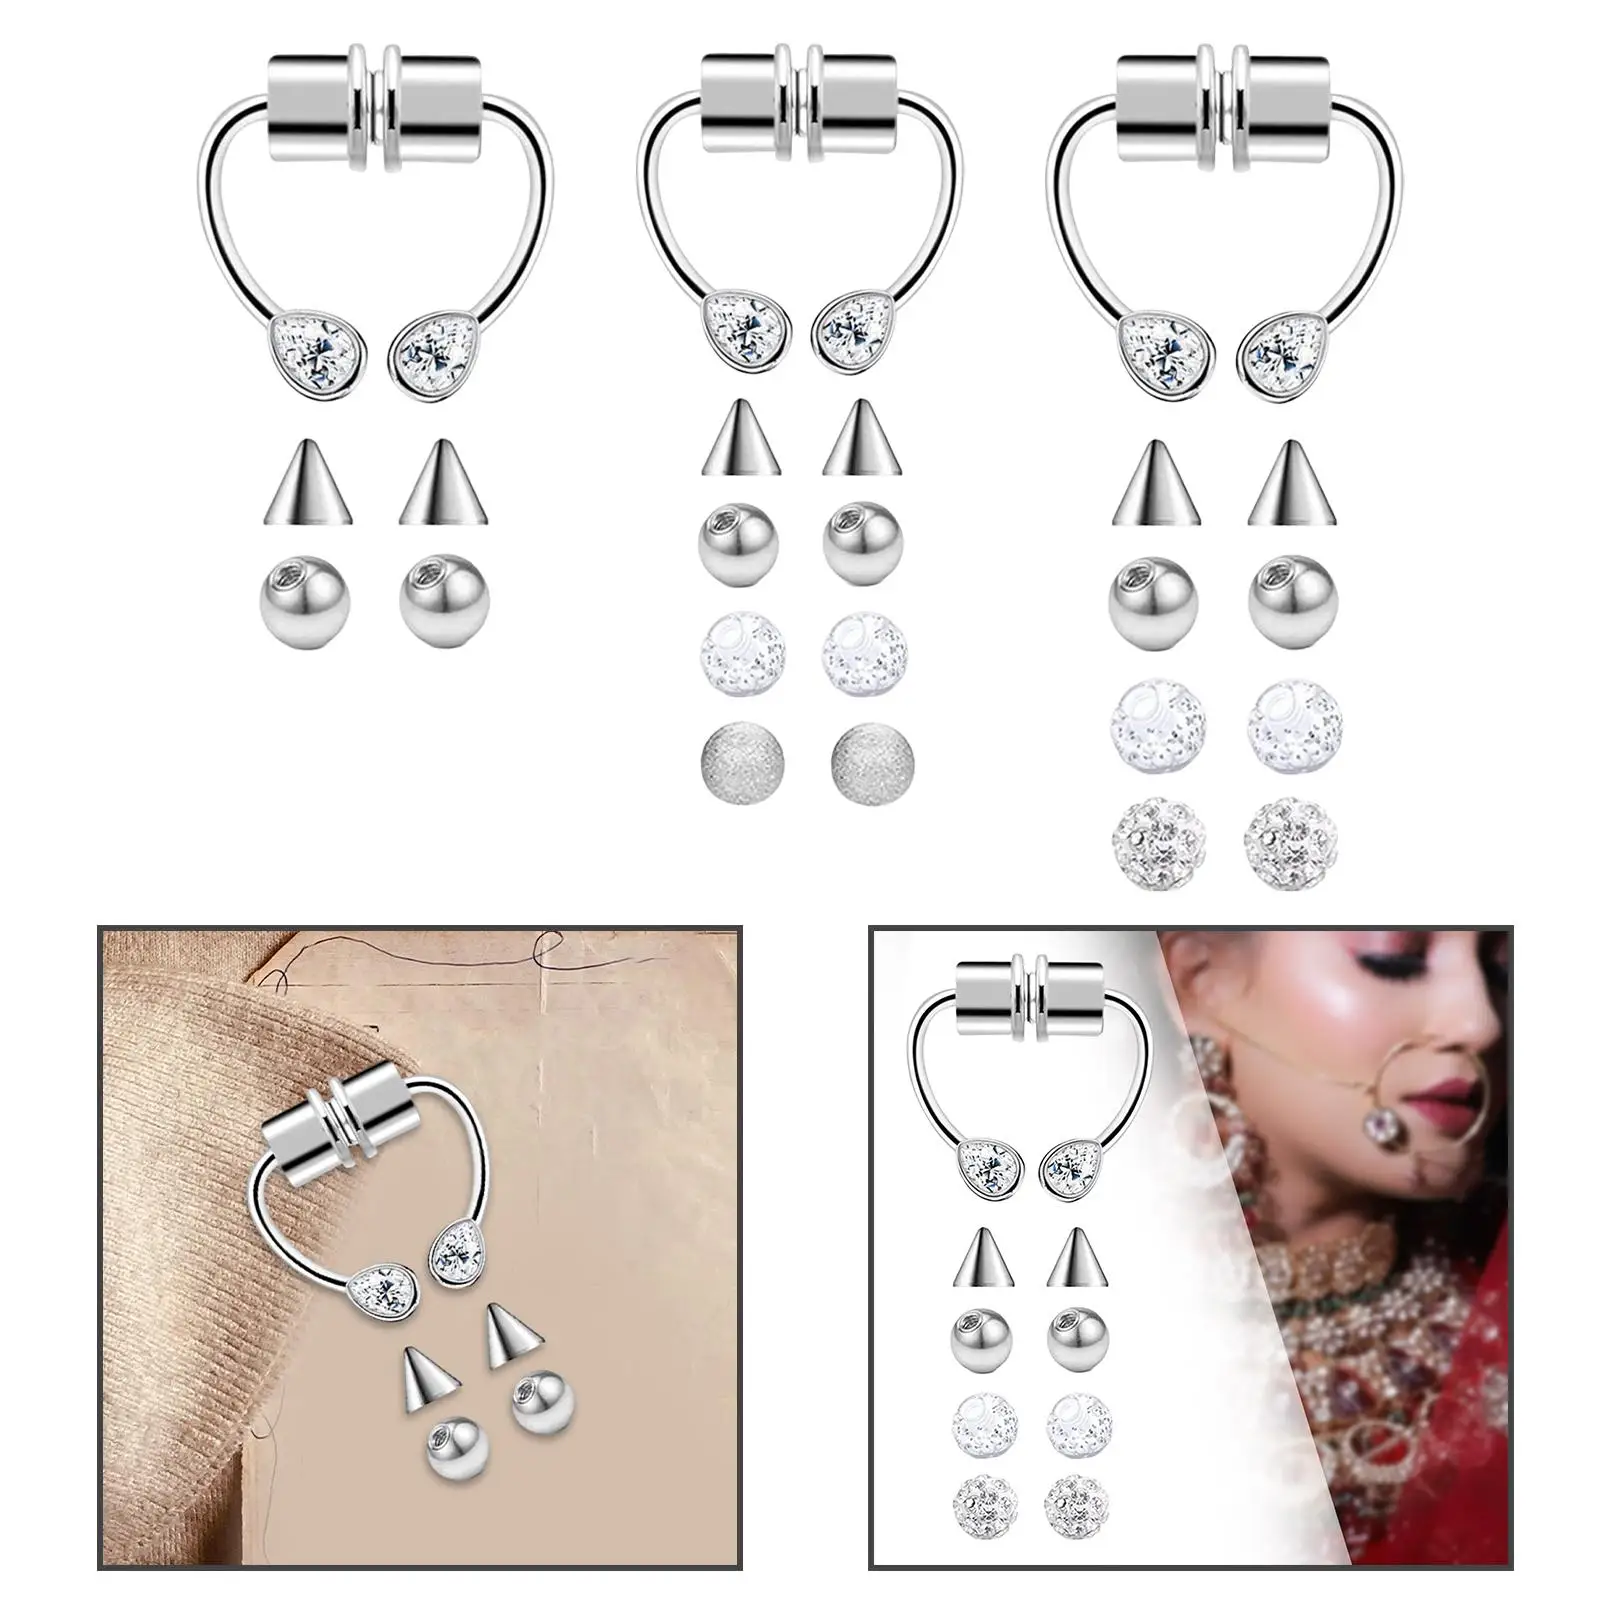 Nose Studs Nose Screw Accessories Comfortable to Wear Stainless Steel Nose Rings Hoop Body Piercing Jewelry for Girls Men Women